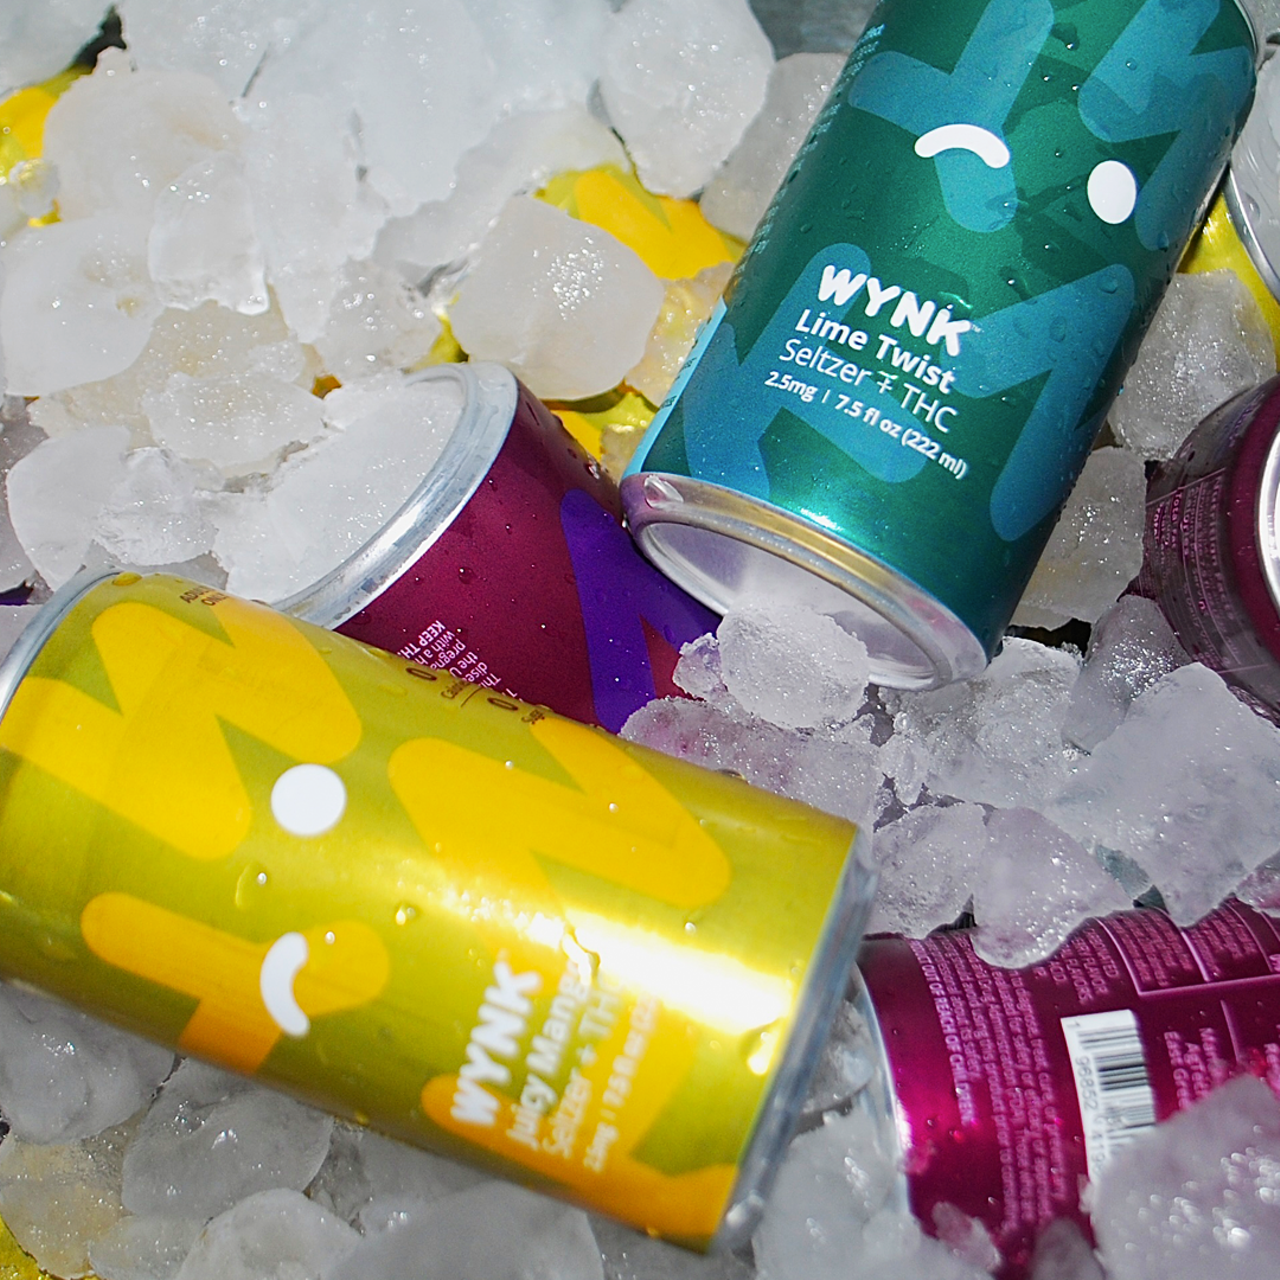 THC Seltzers (WYNK) 
drinkwynk.com 
A number of THC-infused beverages have entered the Michigan market this summer, including WYNK, which boasts being the most widely distributed THC seltzer in the U.S. The zero-calorie seltzers have no sugar and are made with a 1:1 ratio of 2.5mg THC and CBD. They come in three, all-natural flavors: Black Cherry Fizz, Lime Twist, and Juicy Mango.